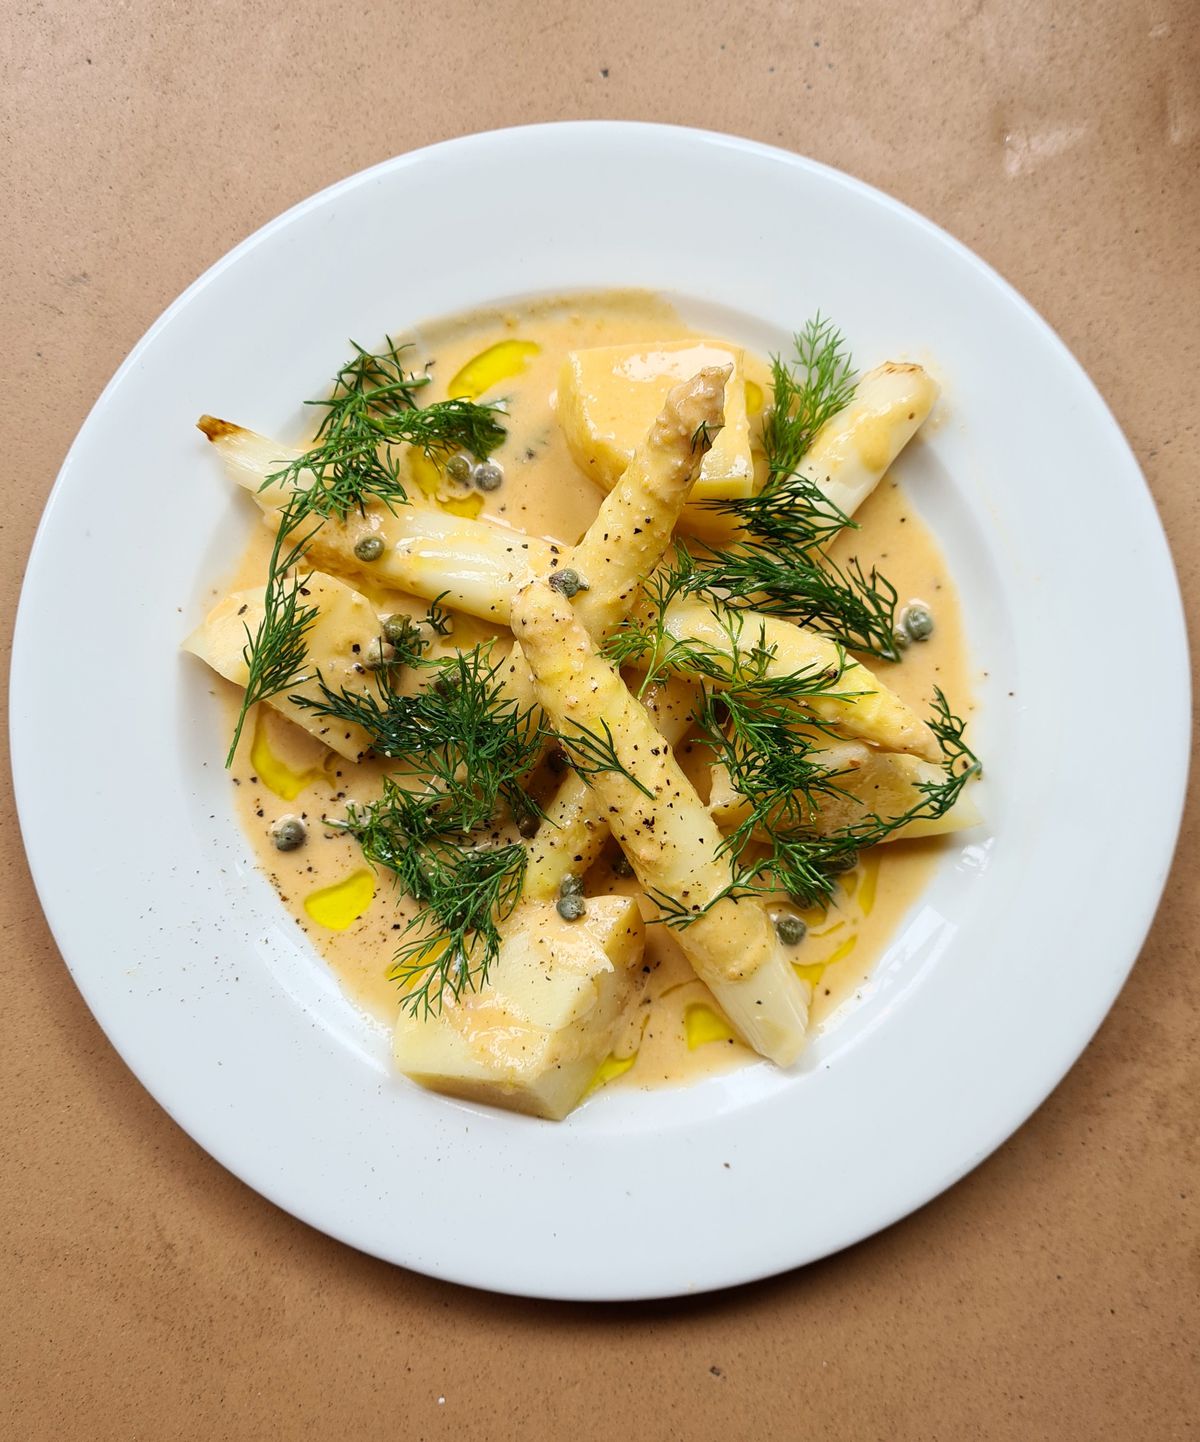 One of the best dishes in London restaurants: a plate of white asparagus in a brown crab butter, scattered with fennel fronds, capers, and dill